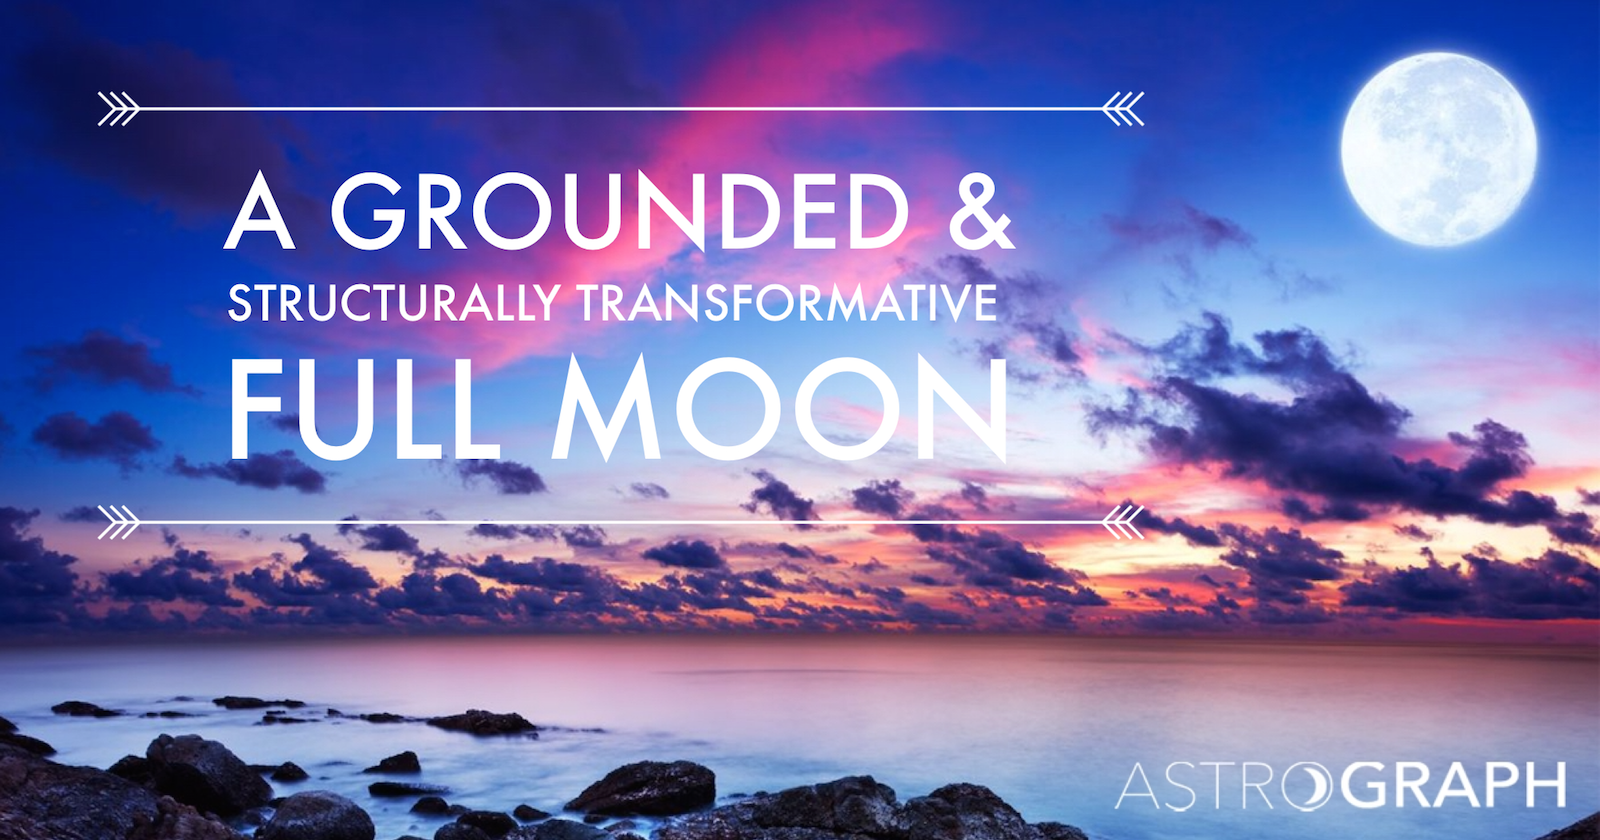 A Grounded and Structurally Transformative Full Moon